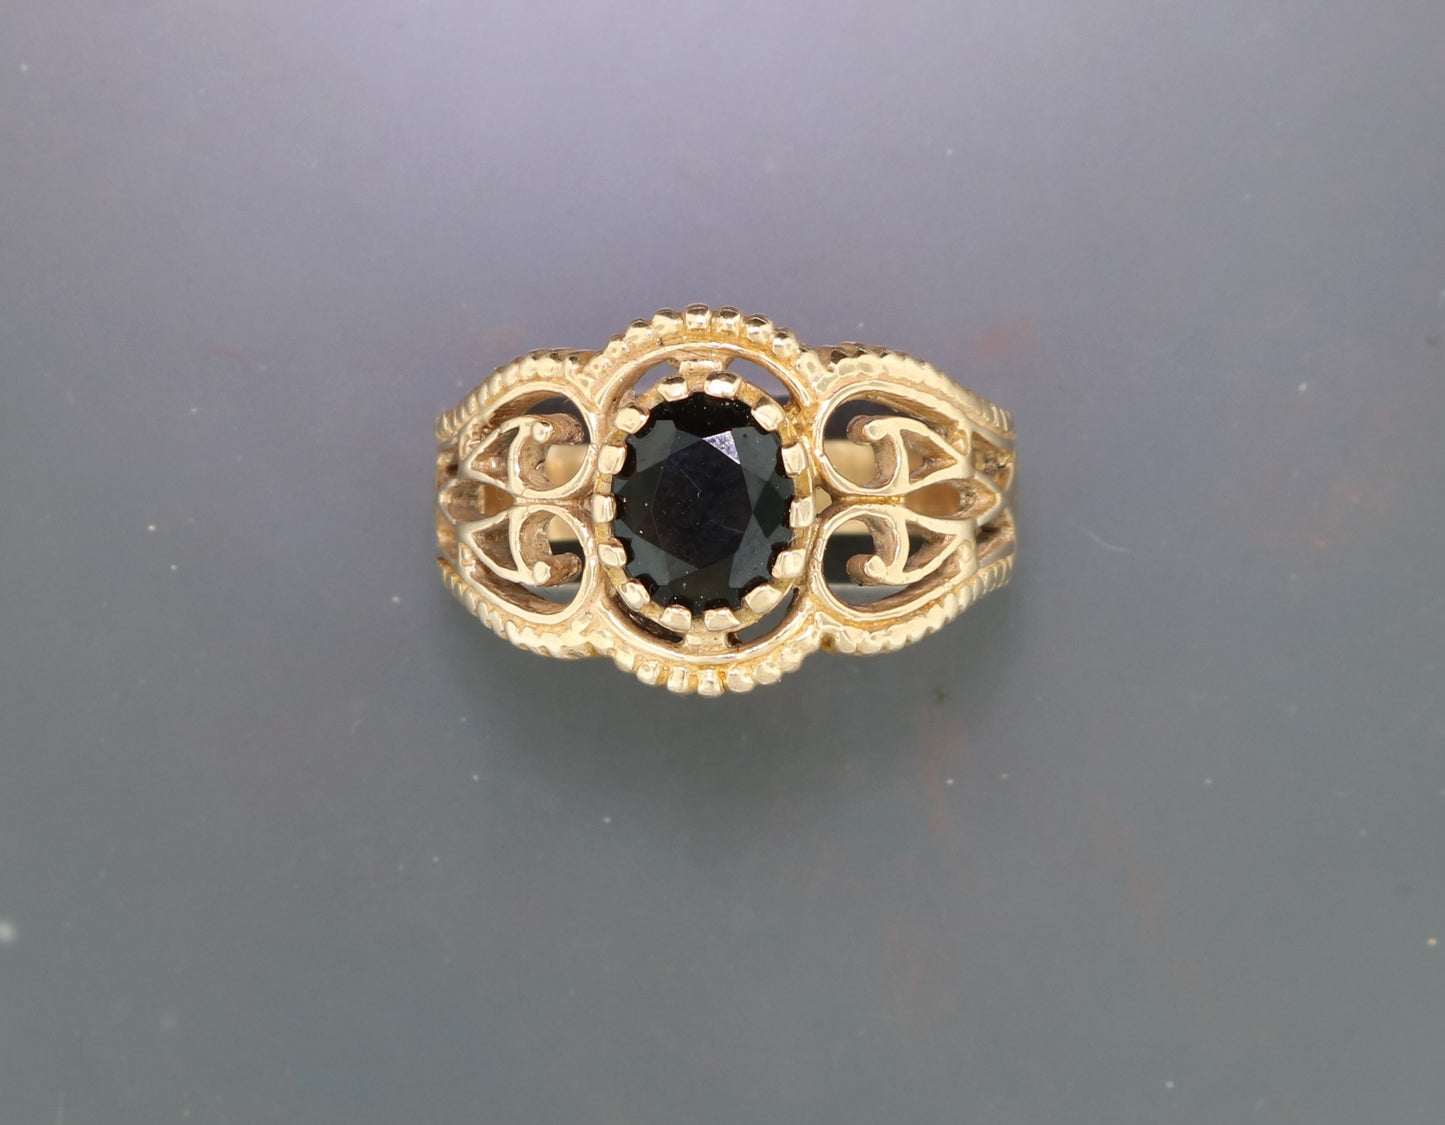 Vintage Style Filigree Ring with Gemstone in Antique Bronze, Gothic Style Ring, Victorian Style Ring, 1950 Style Ring, Antique Bronze Birthstone Ring, Bronze 1950s Ring, Mid Century Bronze Ring, Vintage Bronze Gemstone Ring, Filigree Gemstone Ring